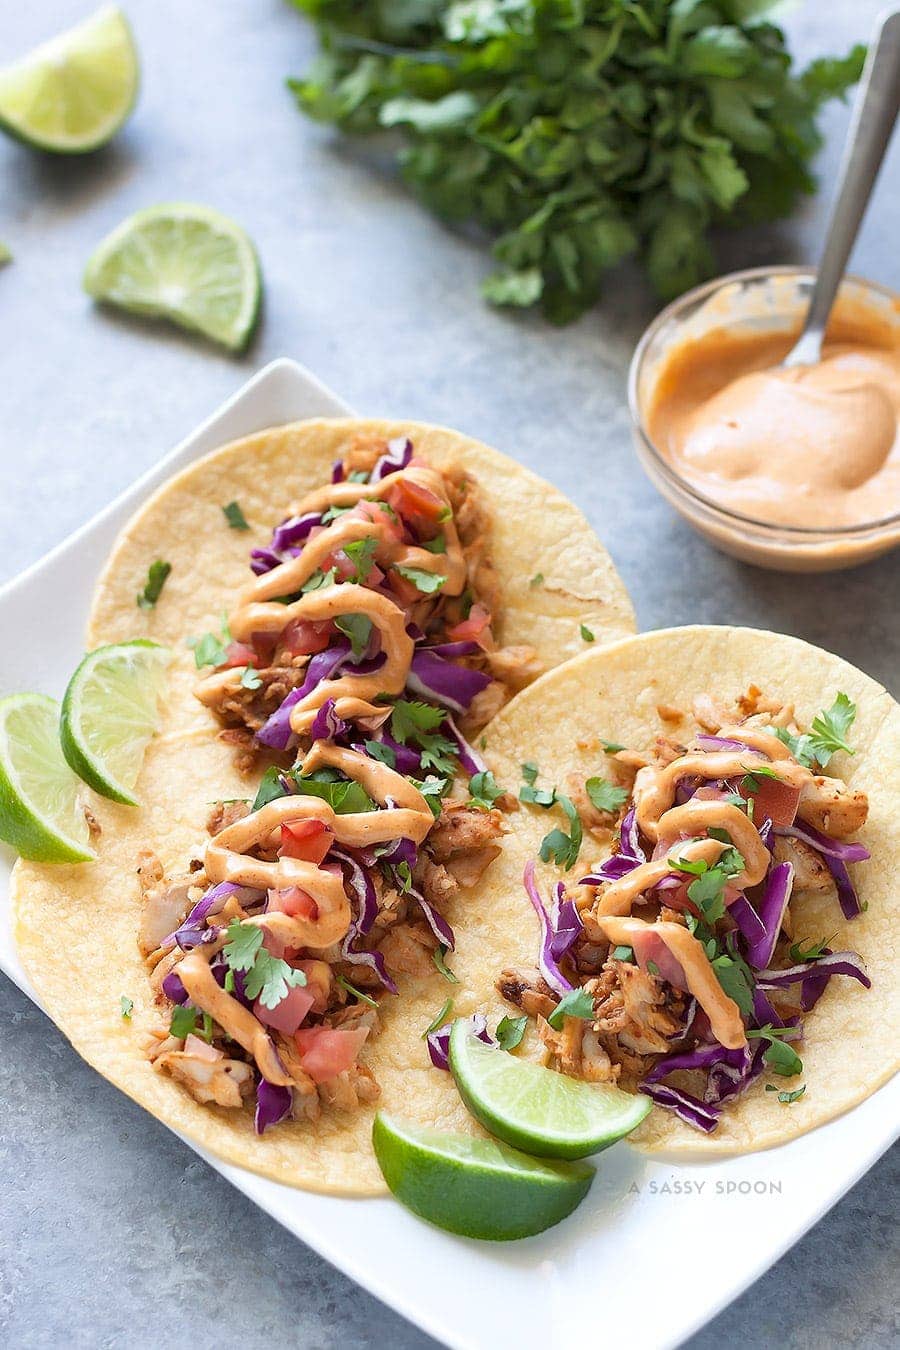 15-Minute Spicy Fish Tacos with Slaw | A Sassy Spoon